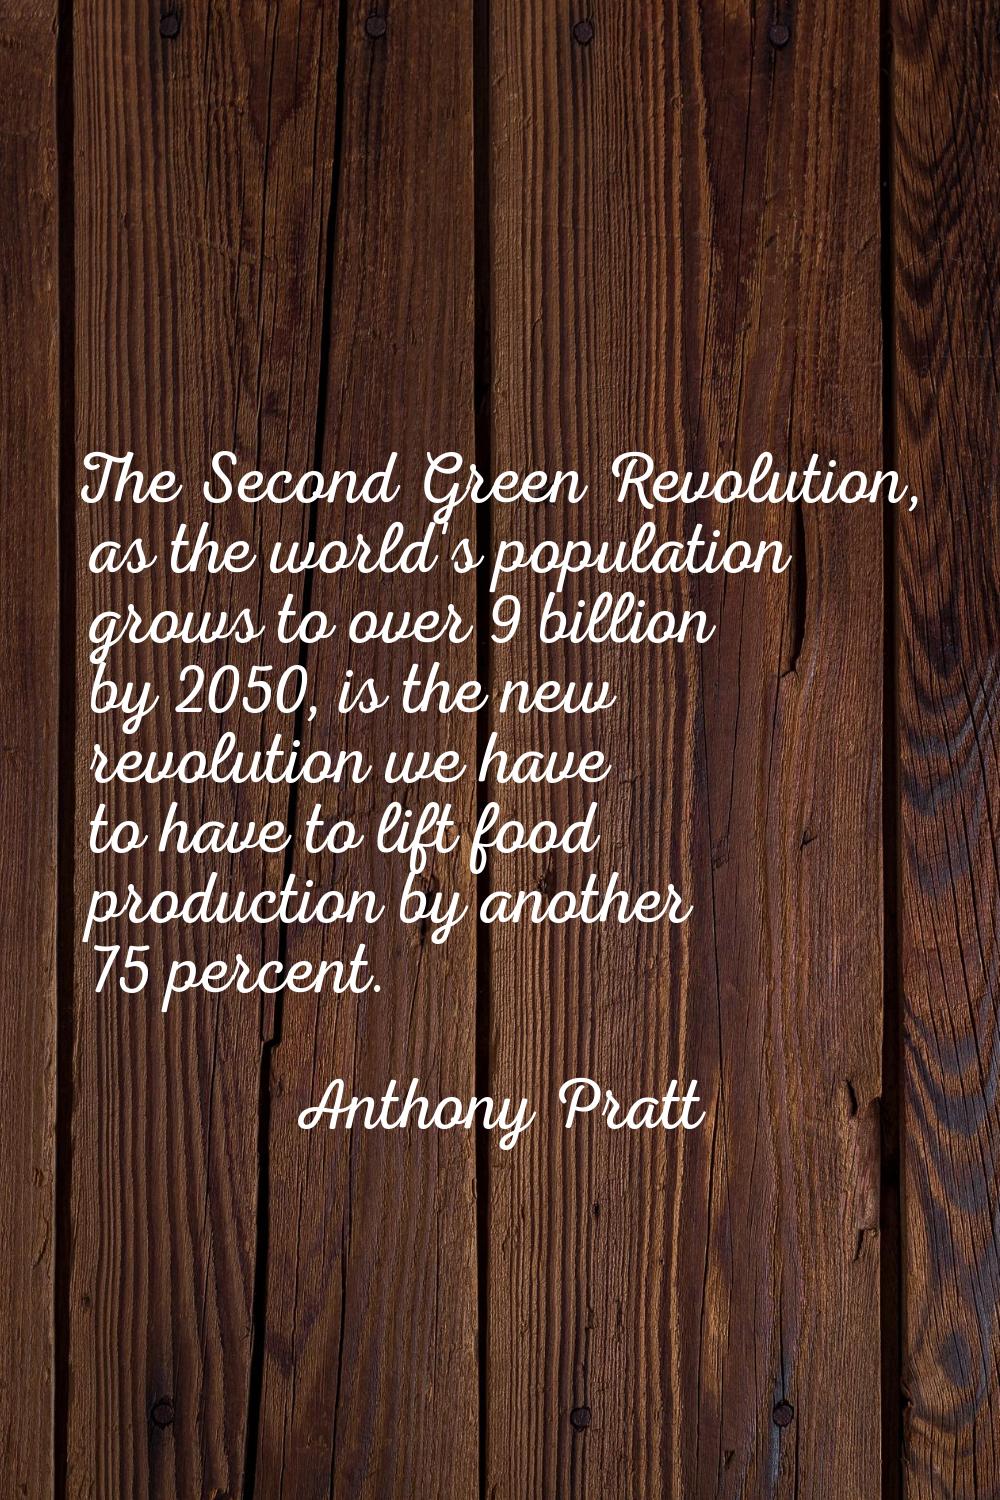 The Second Green Revolution, as the world's population grows to over 9 billion by 2050, is the new 